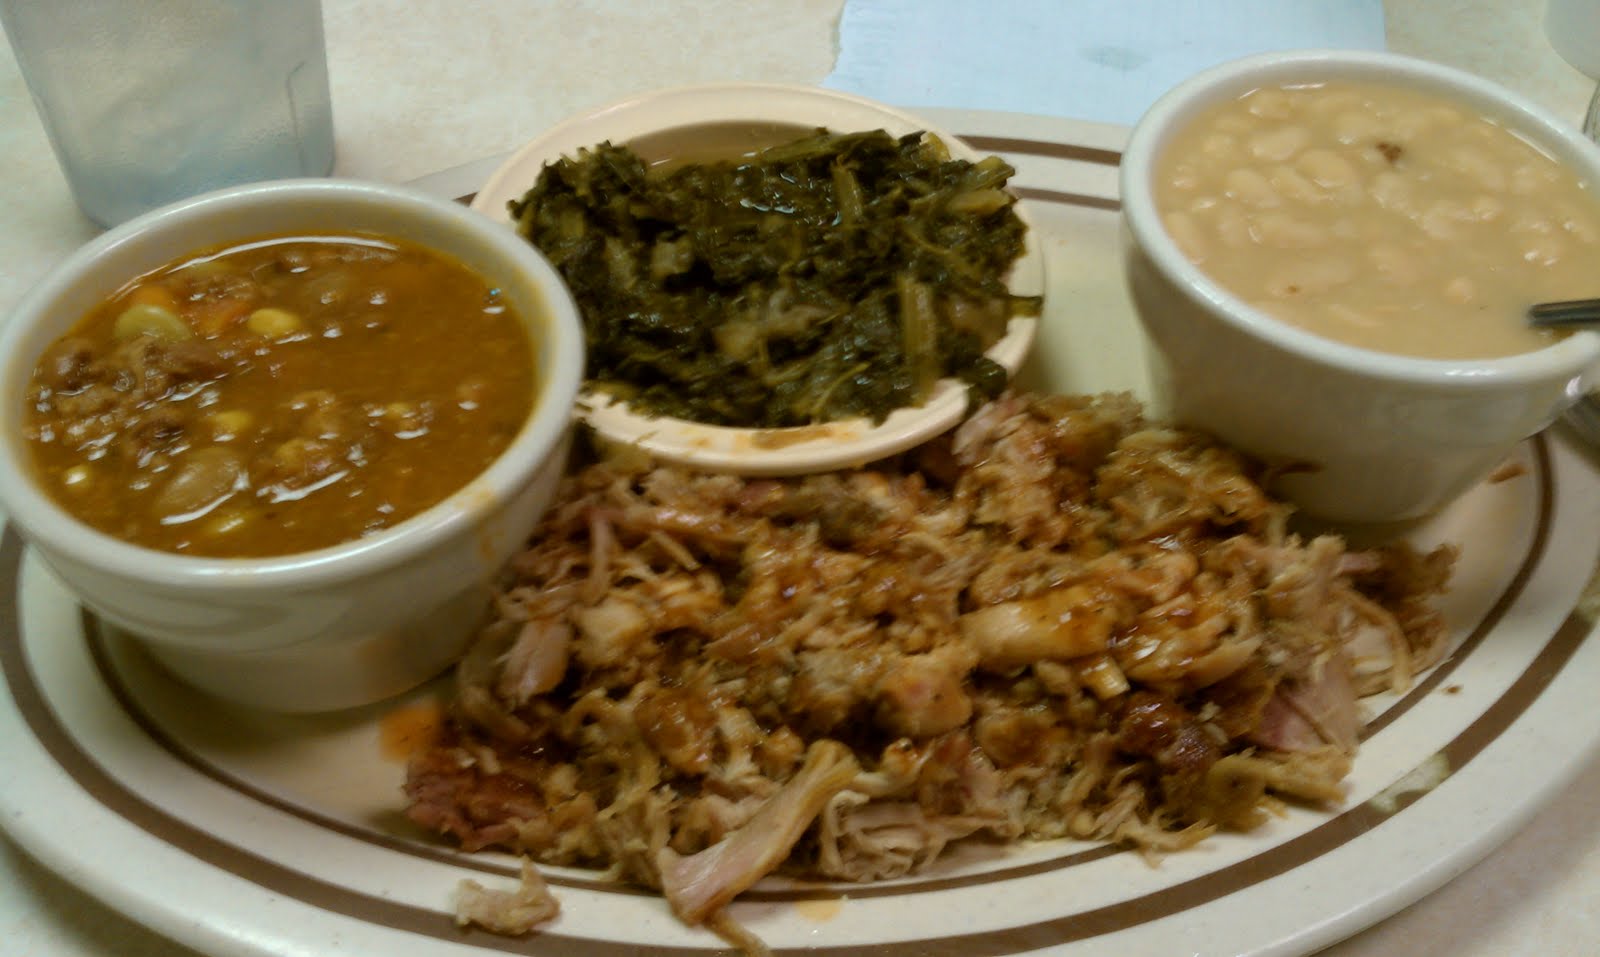 Road Tested: The Woodshed (Hopkinsville, KY)